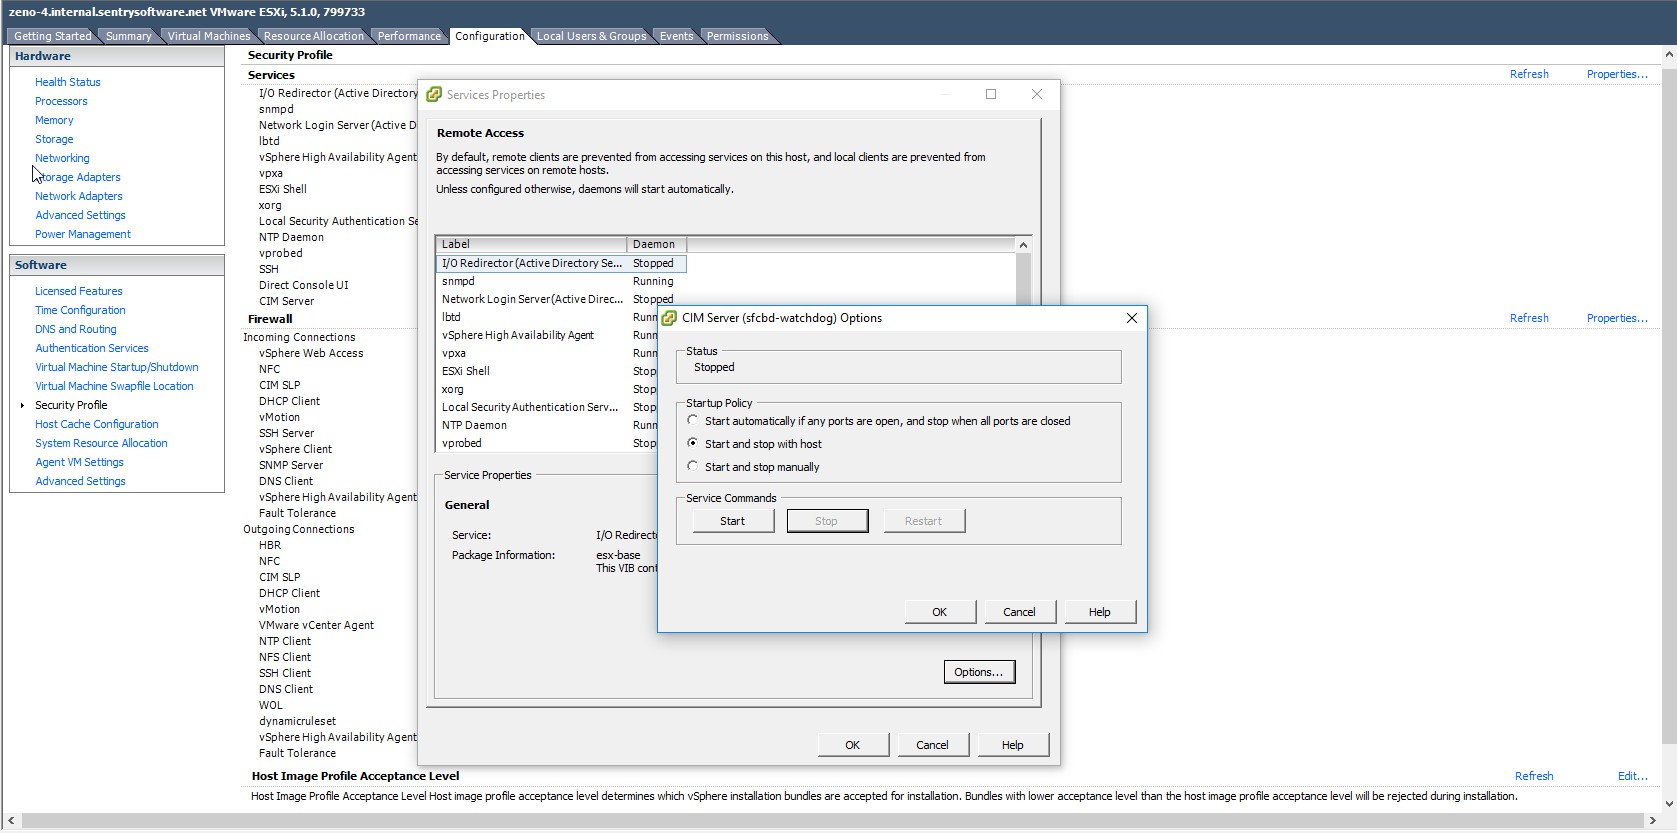 Verifying the status of the CIM server installed on the ESXi system